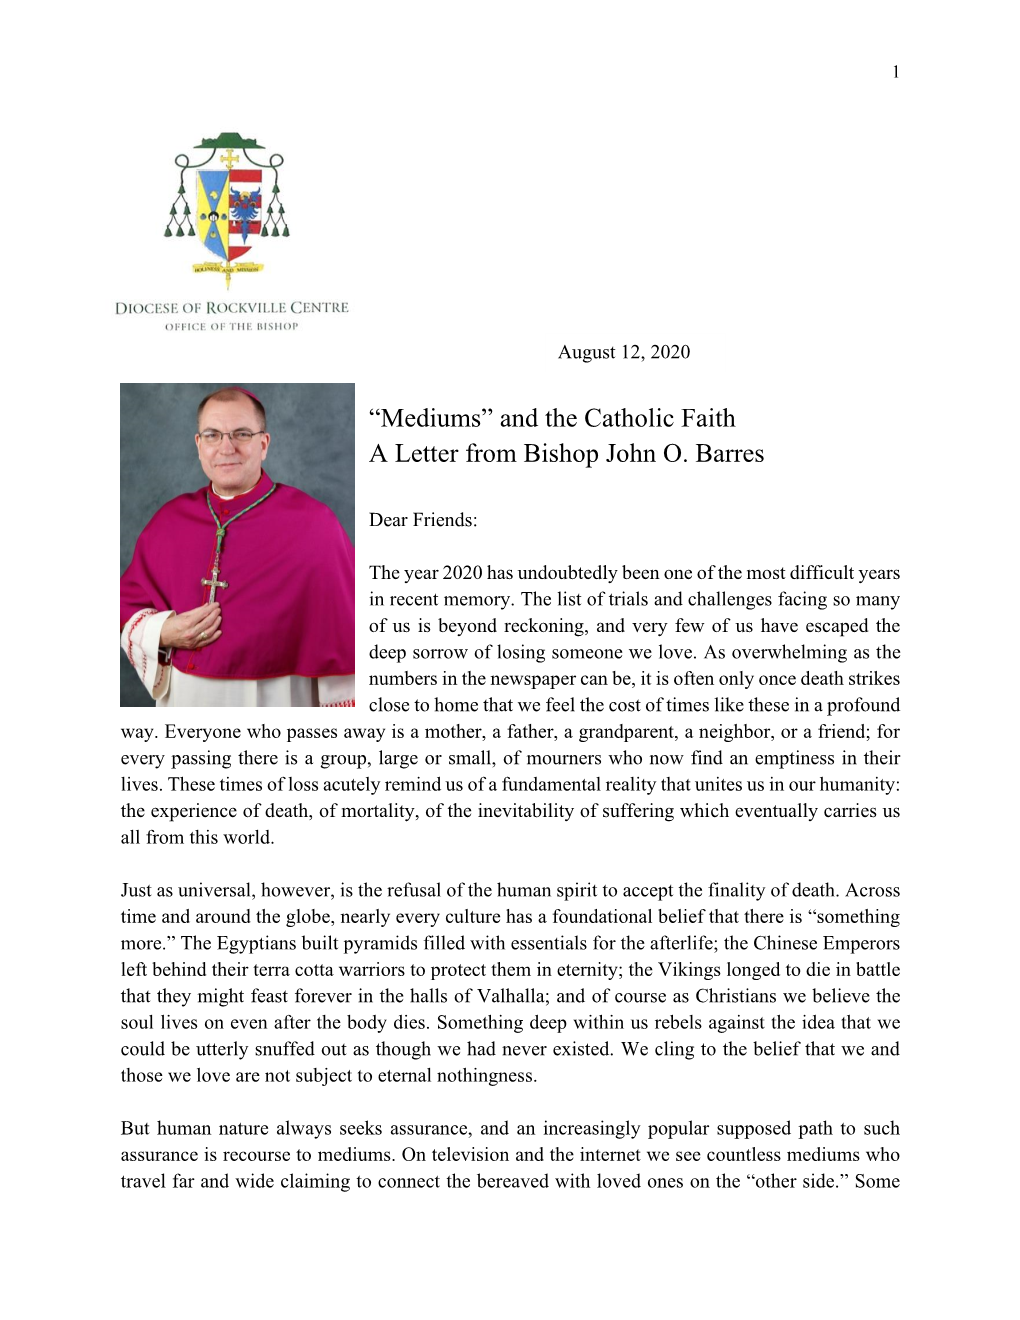 “Mediums” and the Catholic Faith a Letter from Bishop John O. Barres